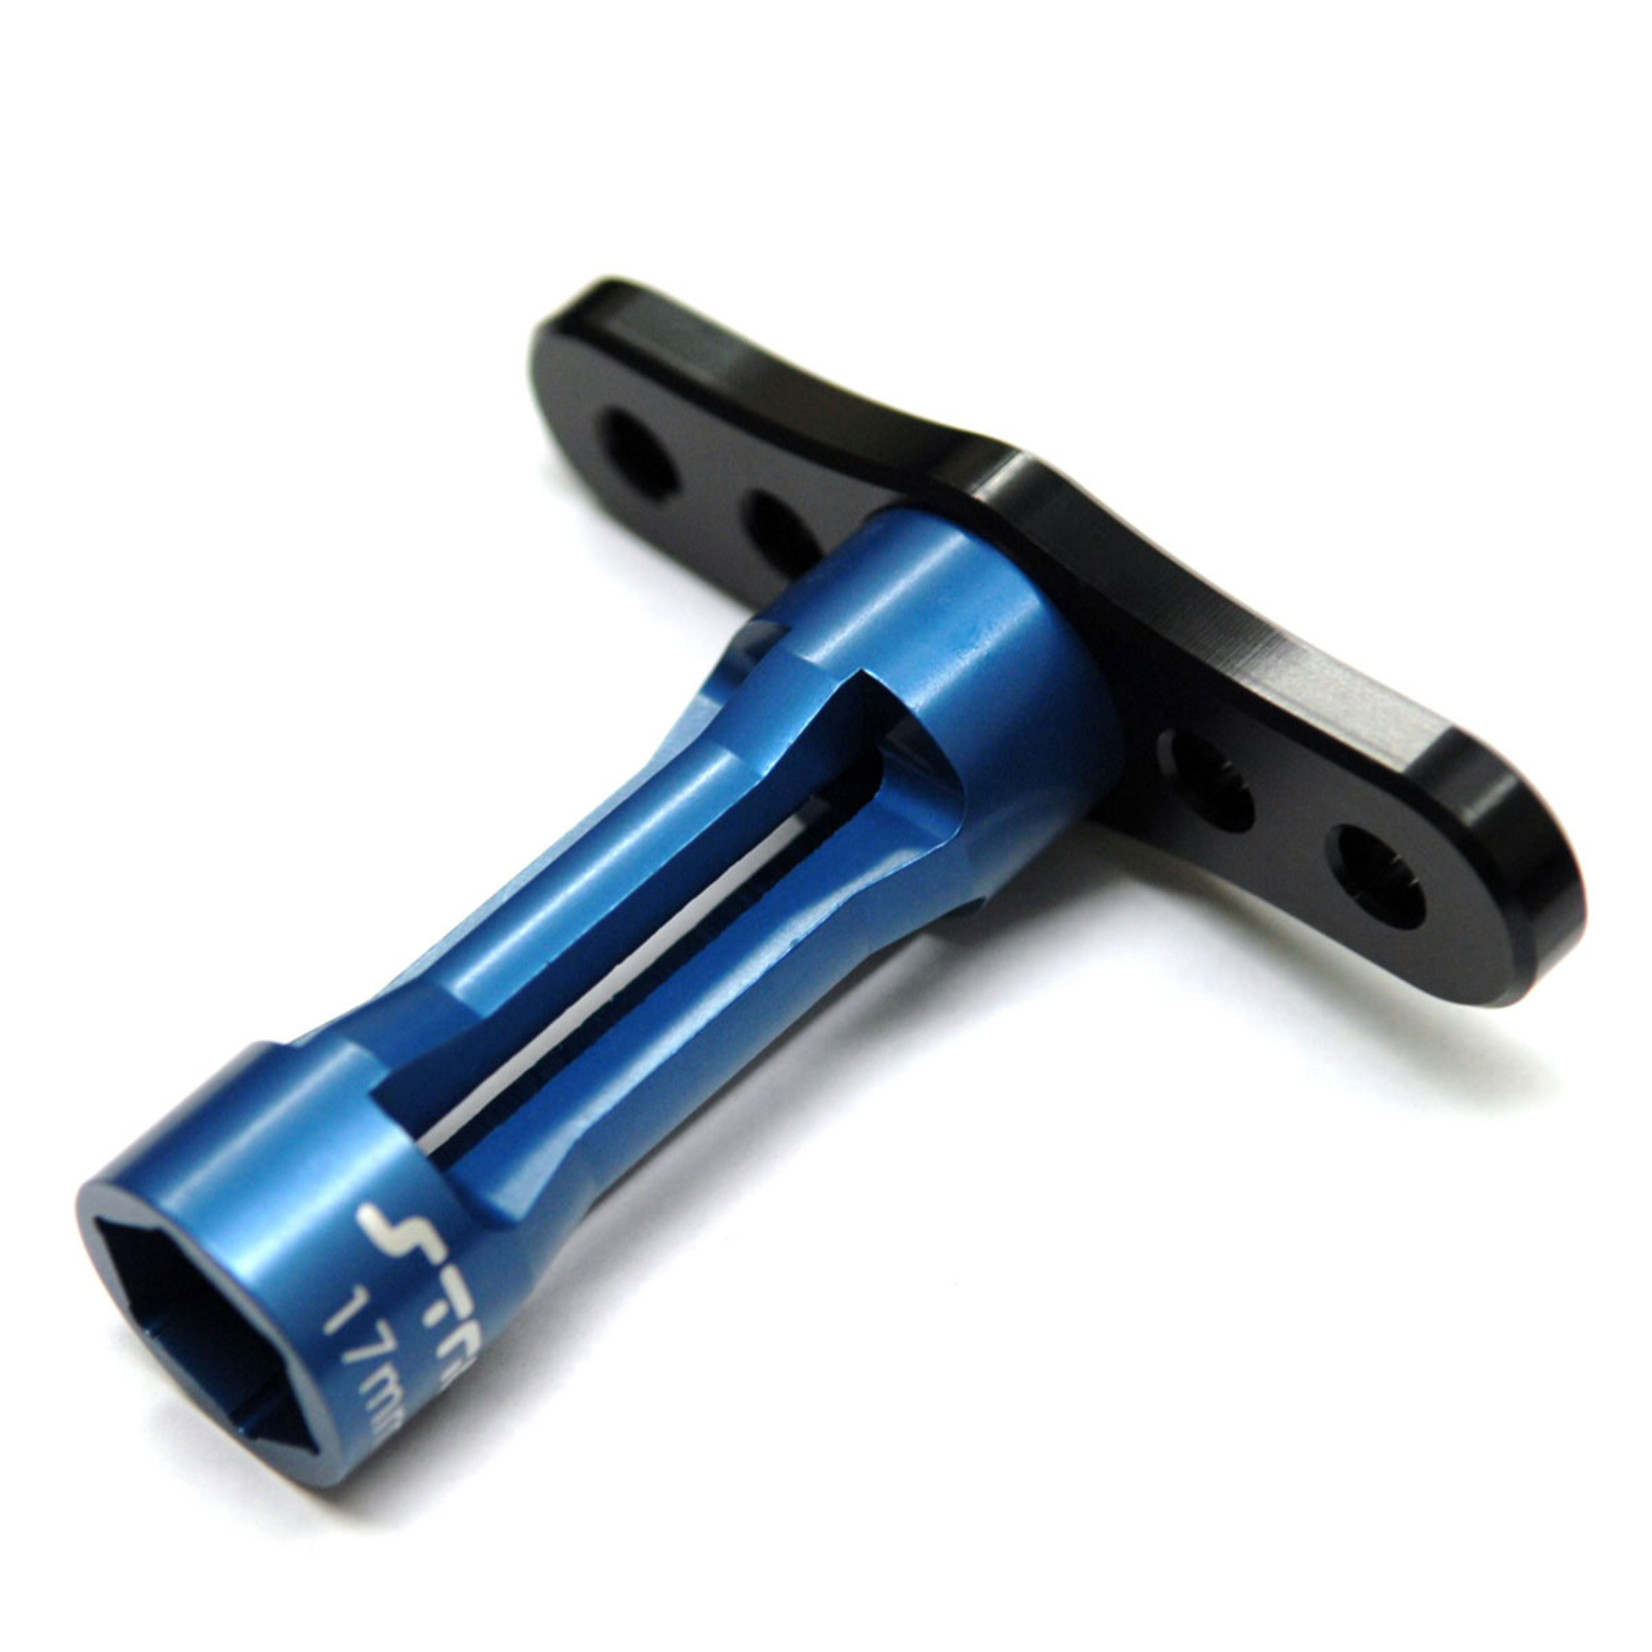 ST Racing Concepts STRA17BKB CNC Machined Aluminum Long Shank 17mm Hex Nut Wrench